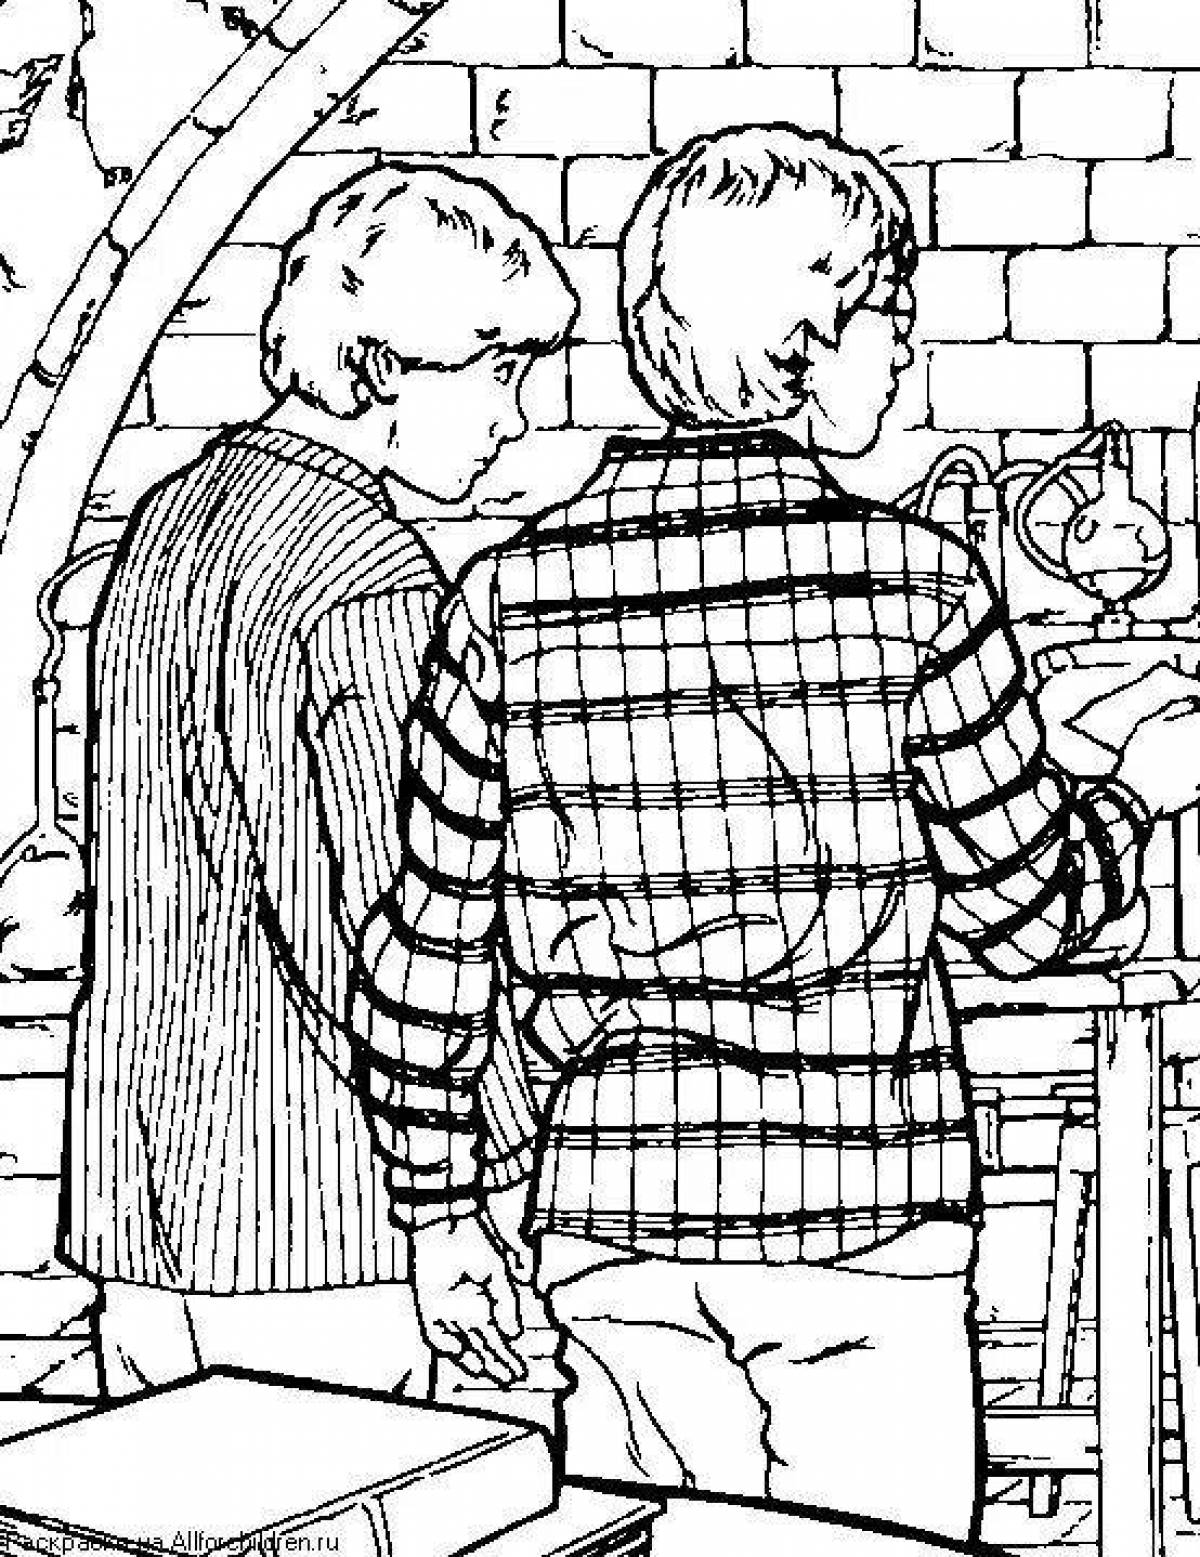 Fantastic harry potter by numbers coloring book